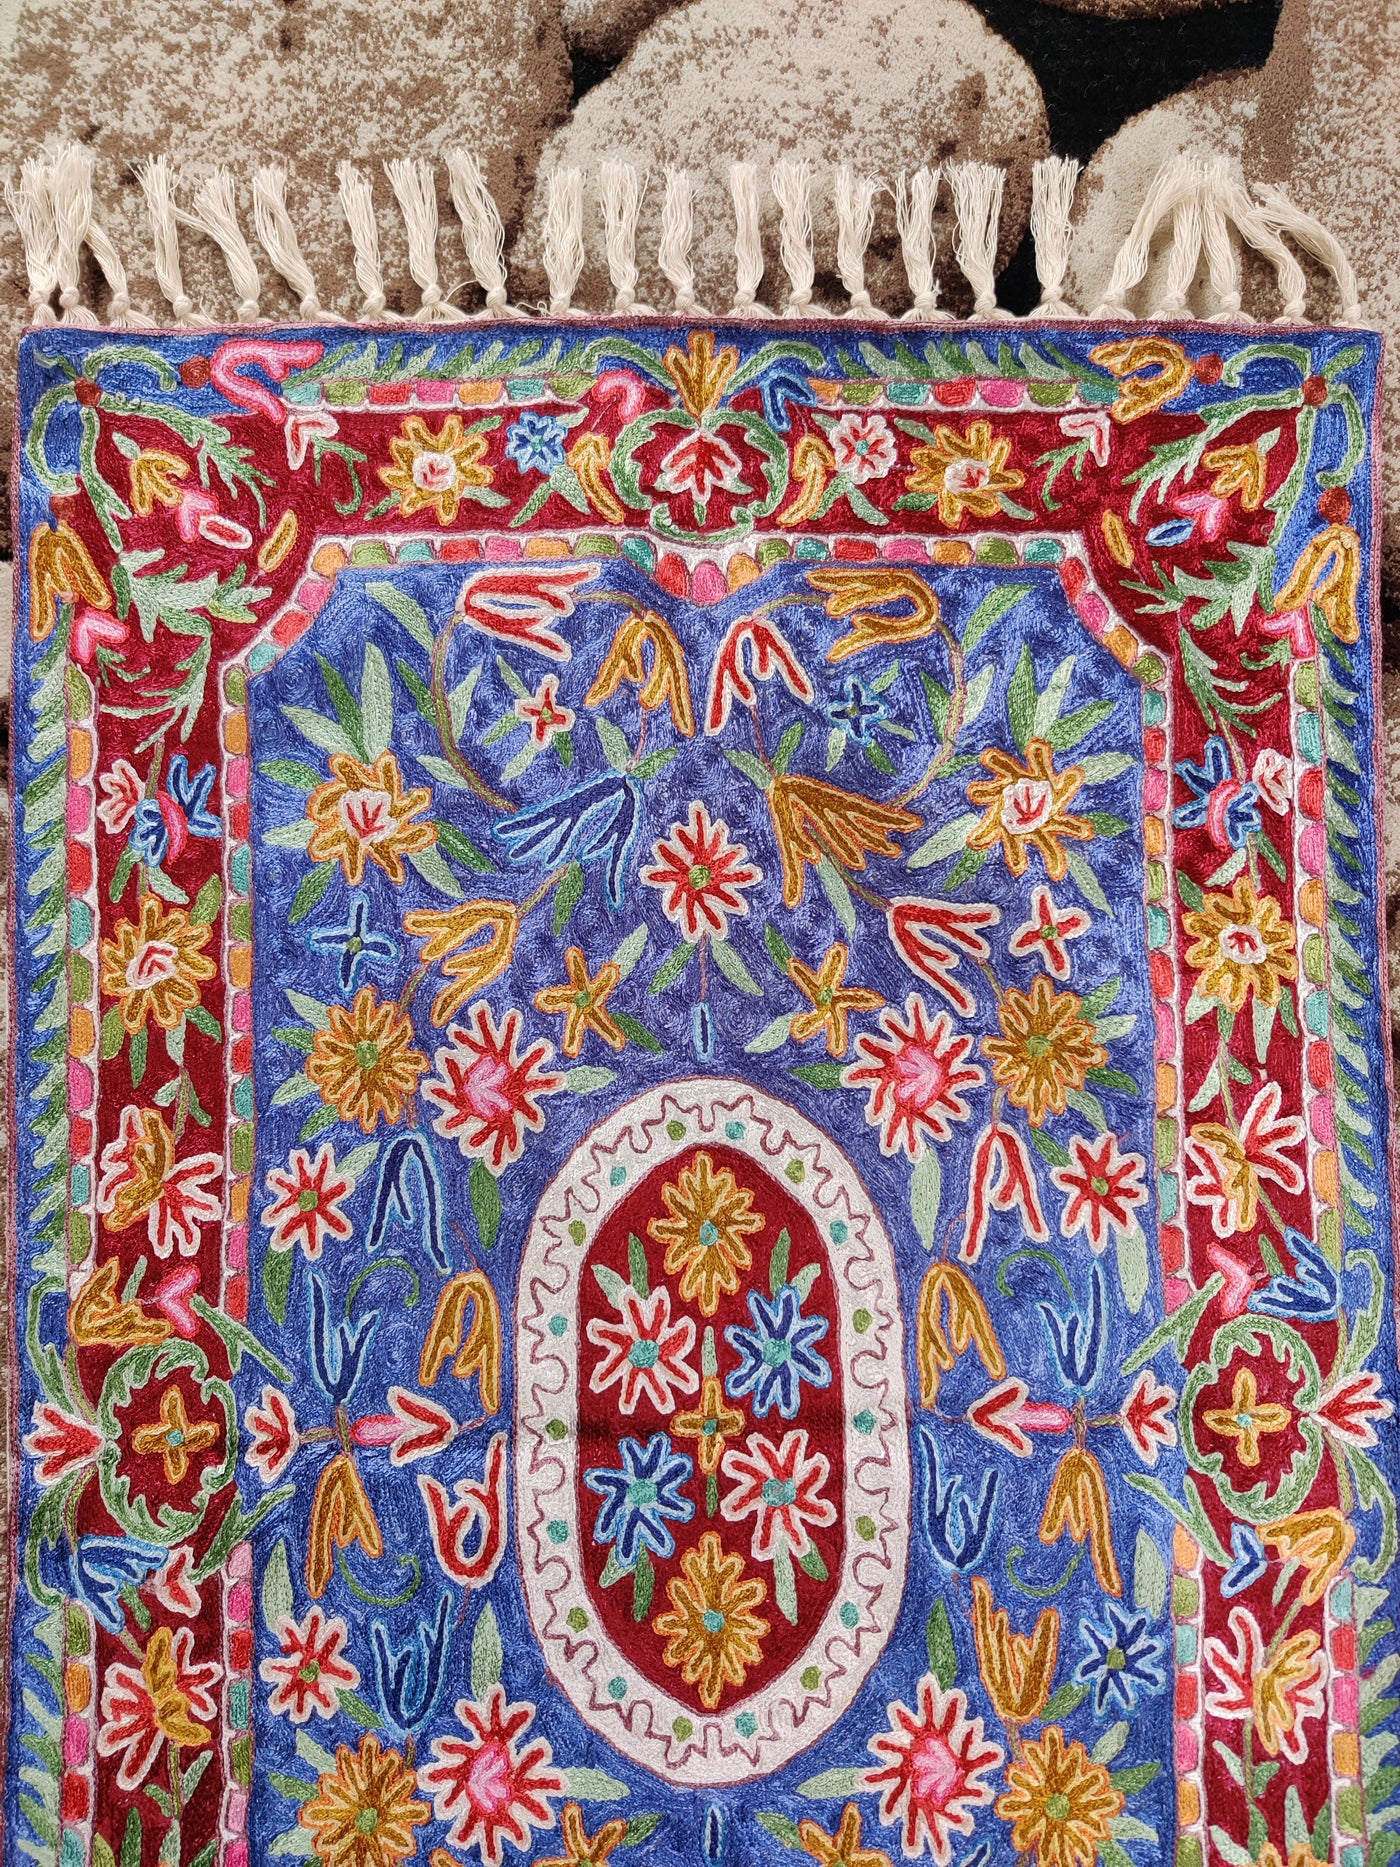 Artistry in Every Stitch: Hand-Aari Embroidered Rug 3 x 2